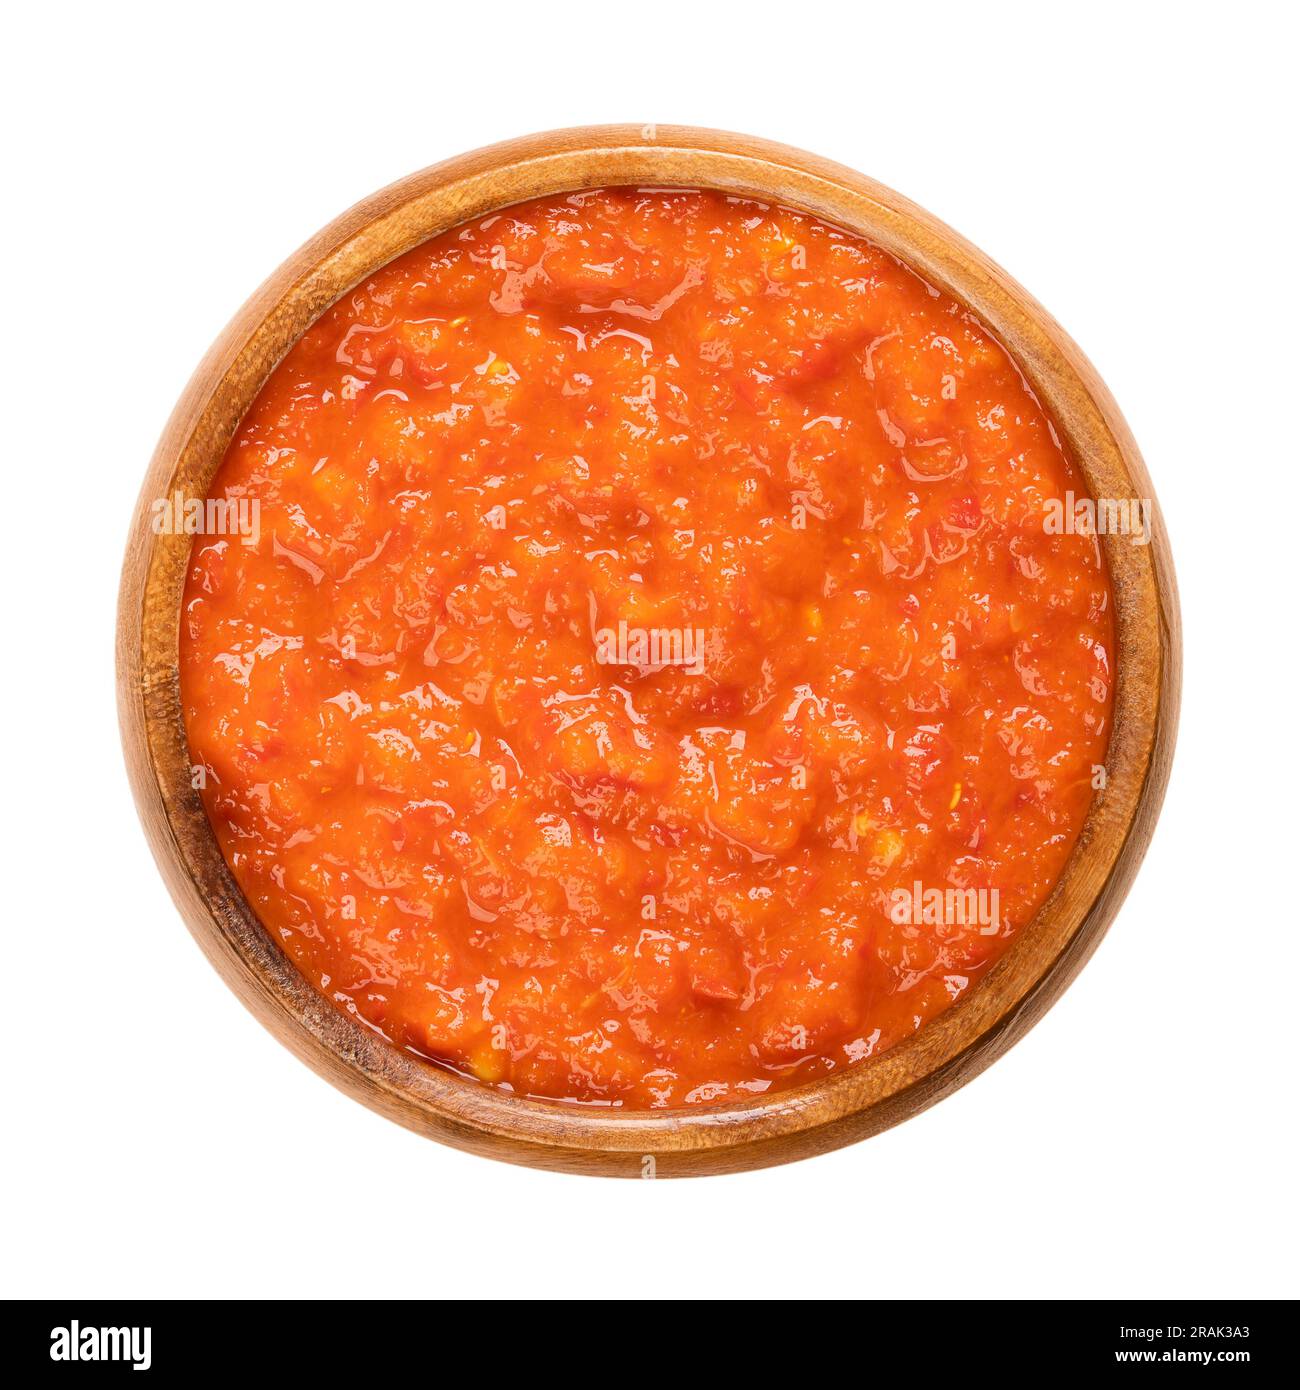 Ajvar, relish made of roasted sweet bell peppers, in a wooden bowl. Condiment, bread spread and side dish, popular in the Balkans. Stock Photo